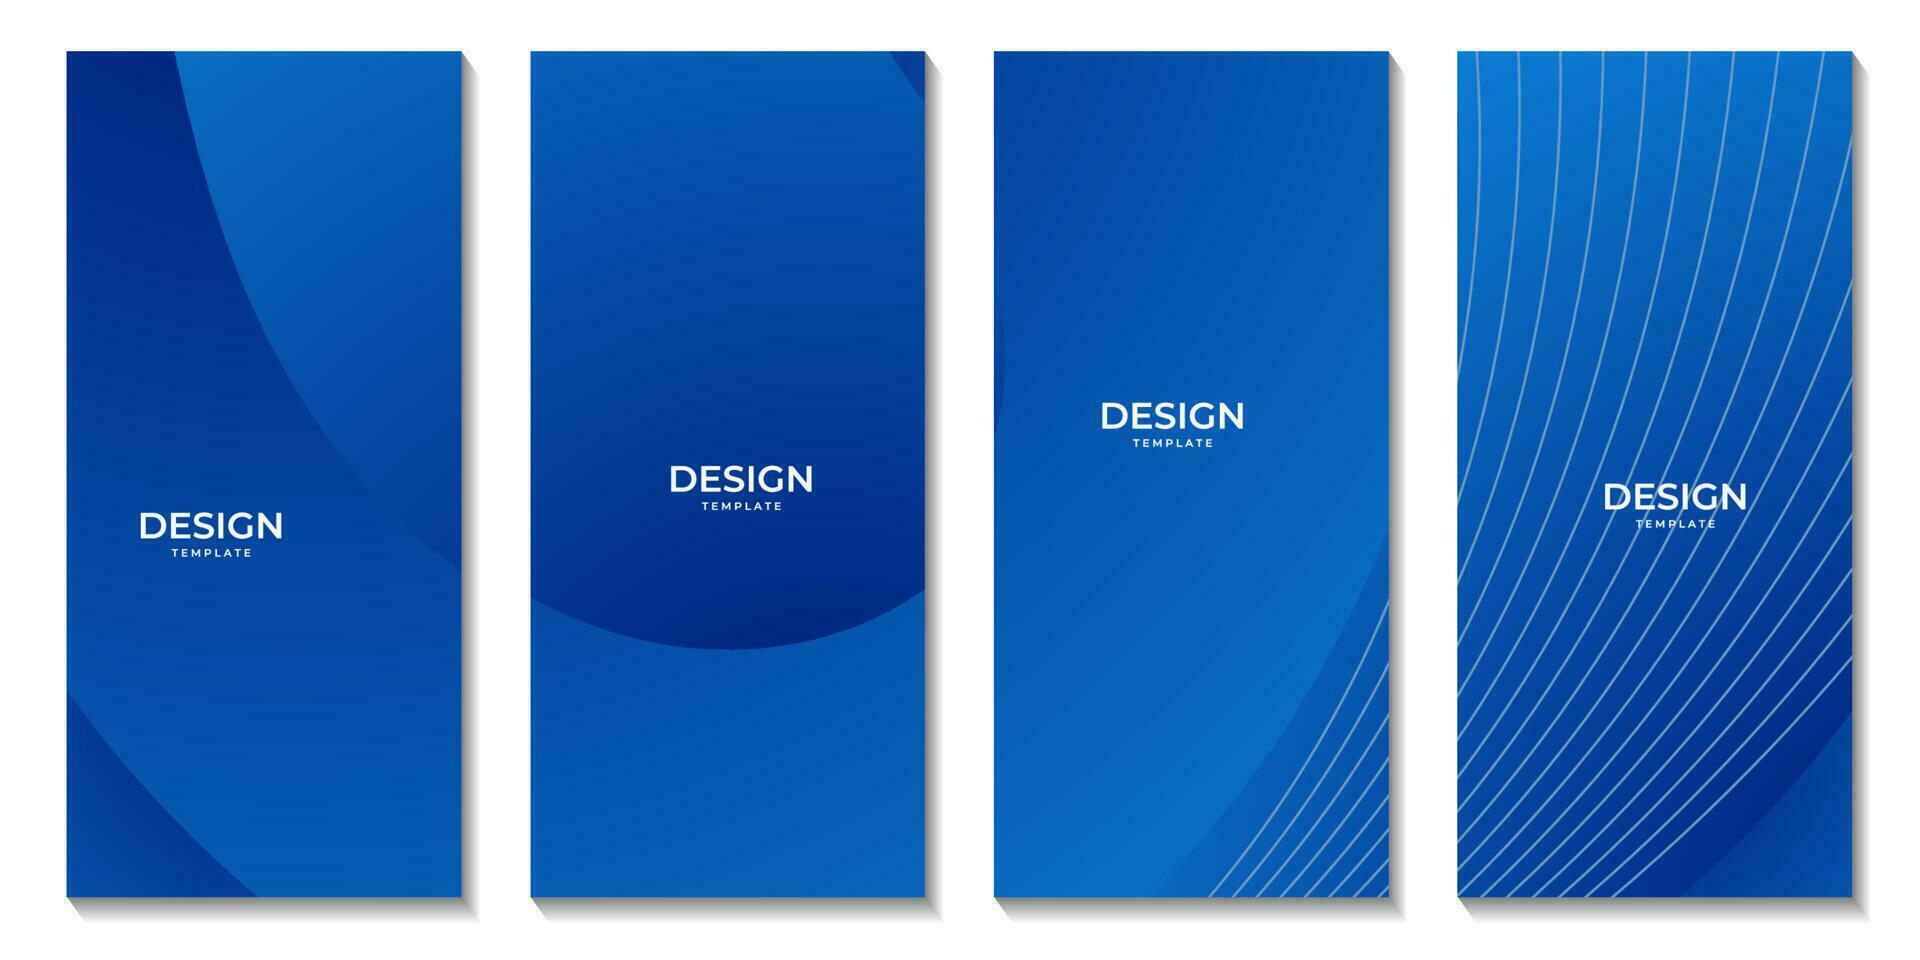 banners blue abstract background. vector illustration